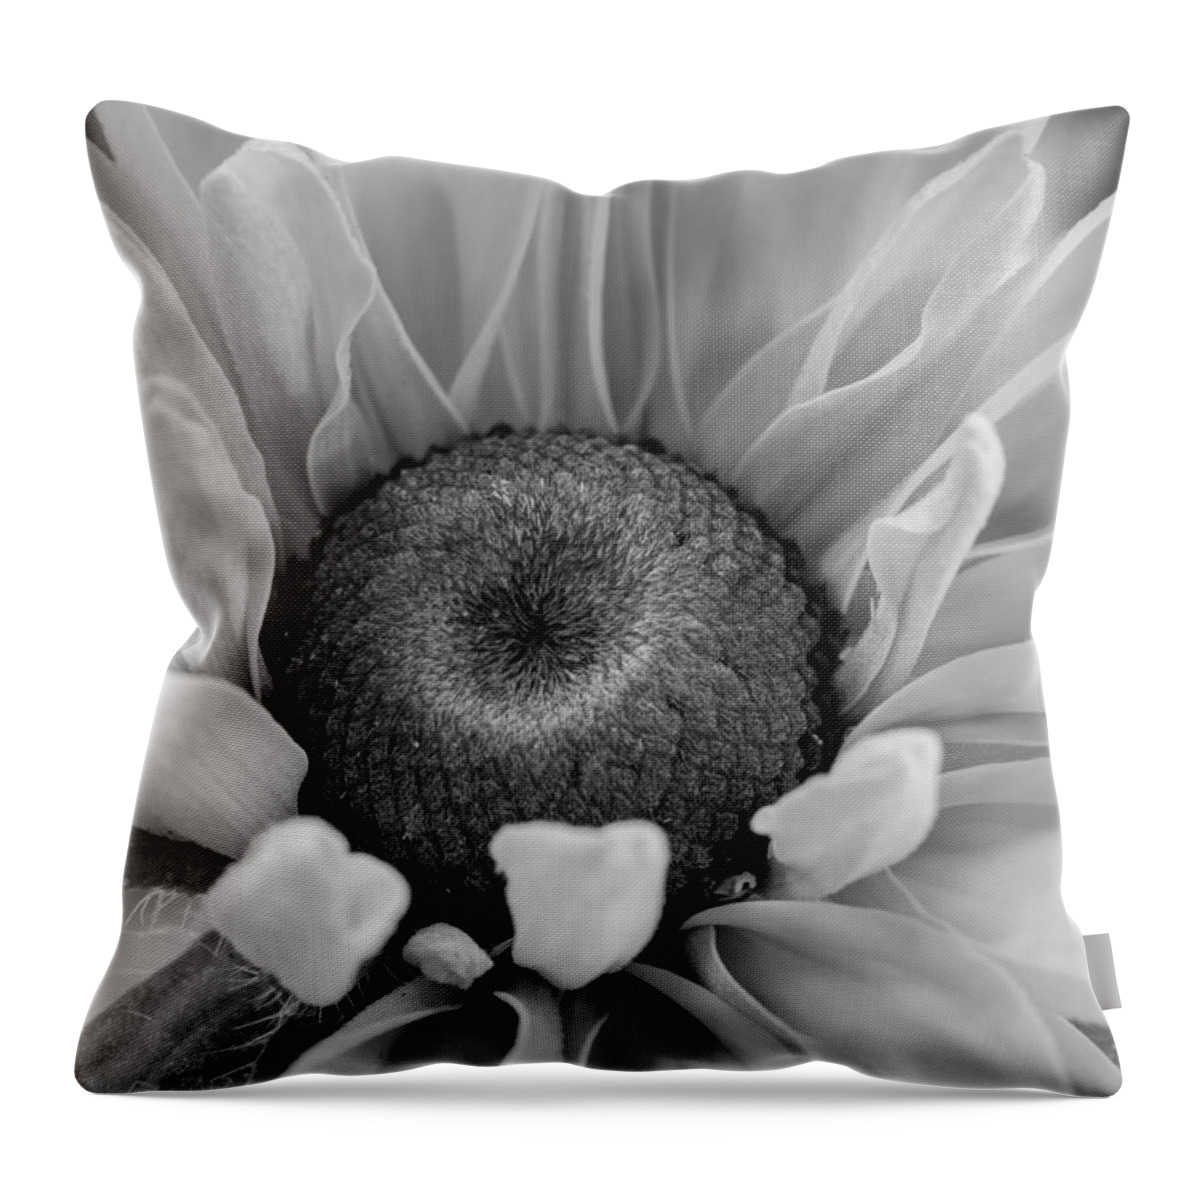 Macro Throw Pillow featuring the photograph I Must Be Dreaming by Heidi Smith